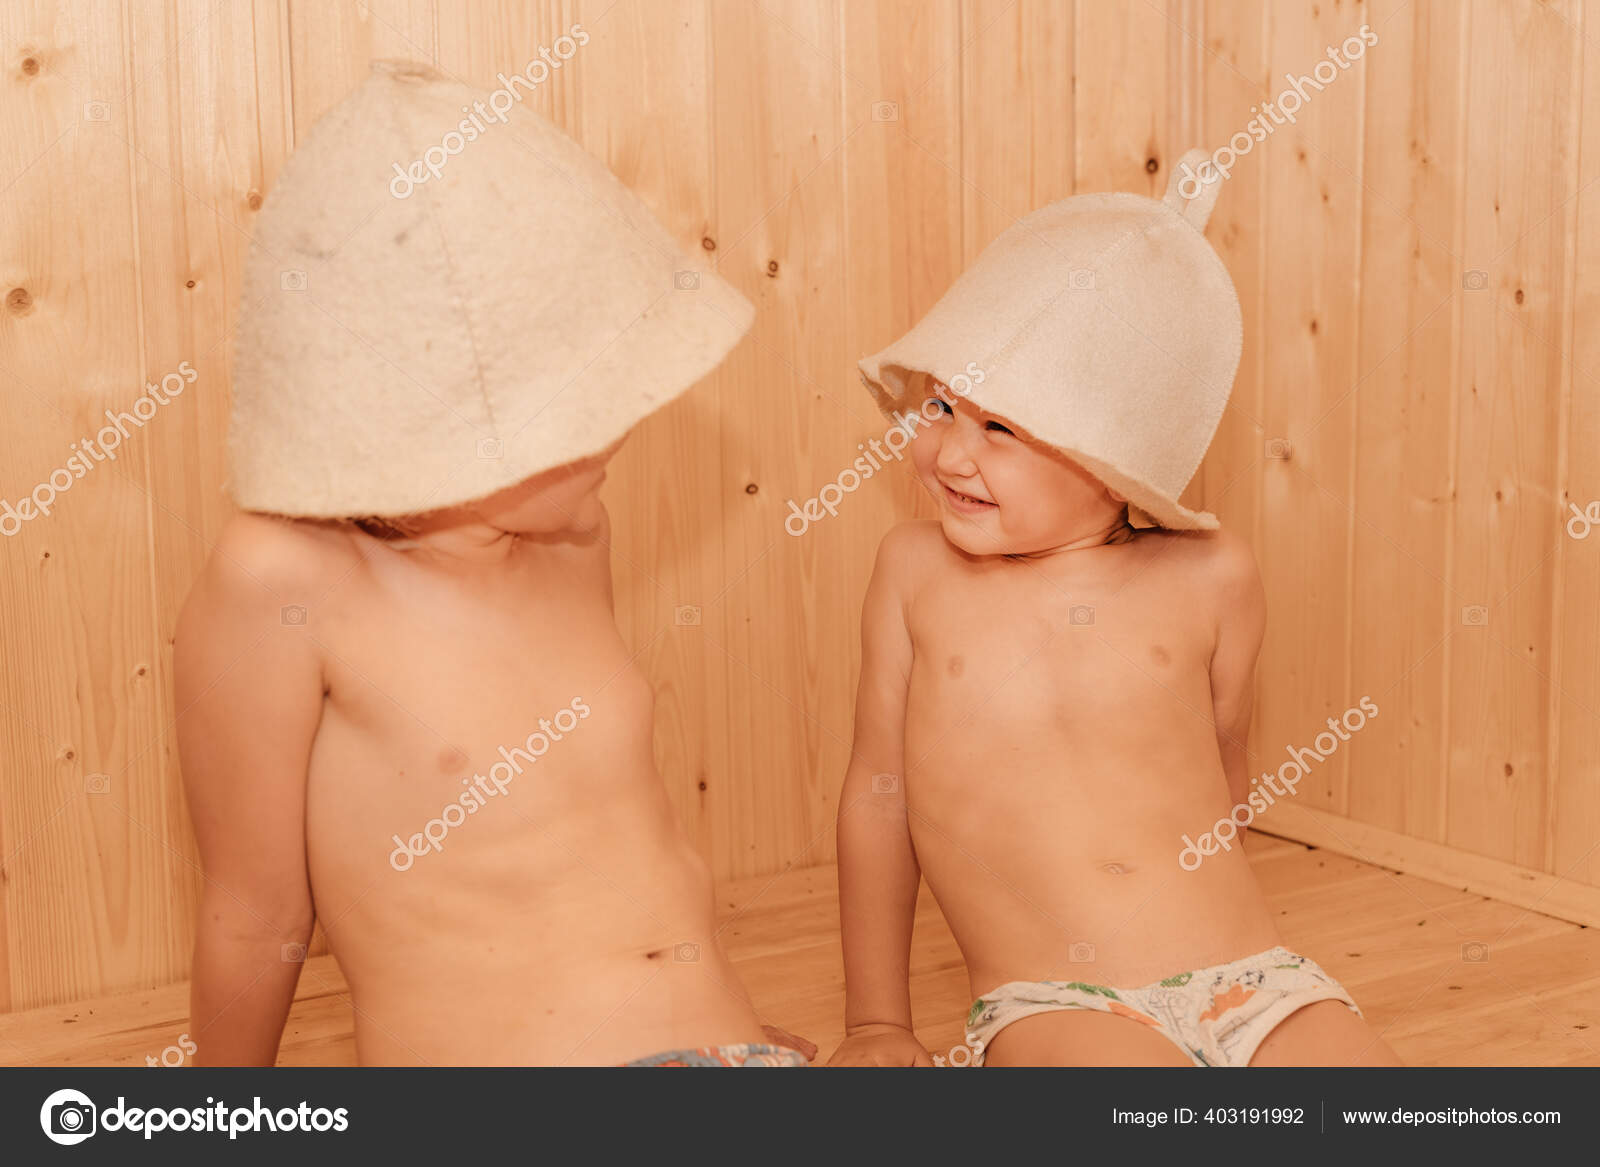 Beauty Healthcare Baby Boy Relaxing In The Sauna Toddler With Broom And Hat  In Russian Sauna Or Bath Stock Photo - Download Image Now - iStock